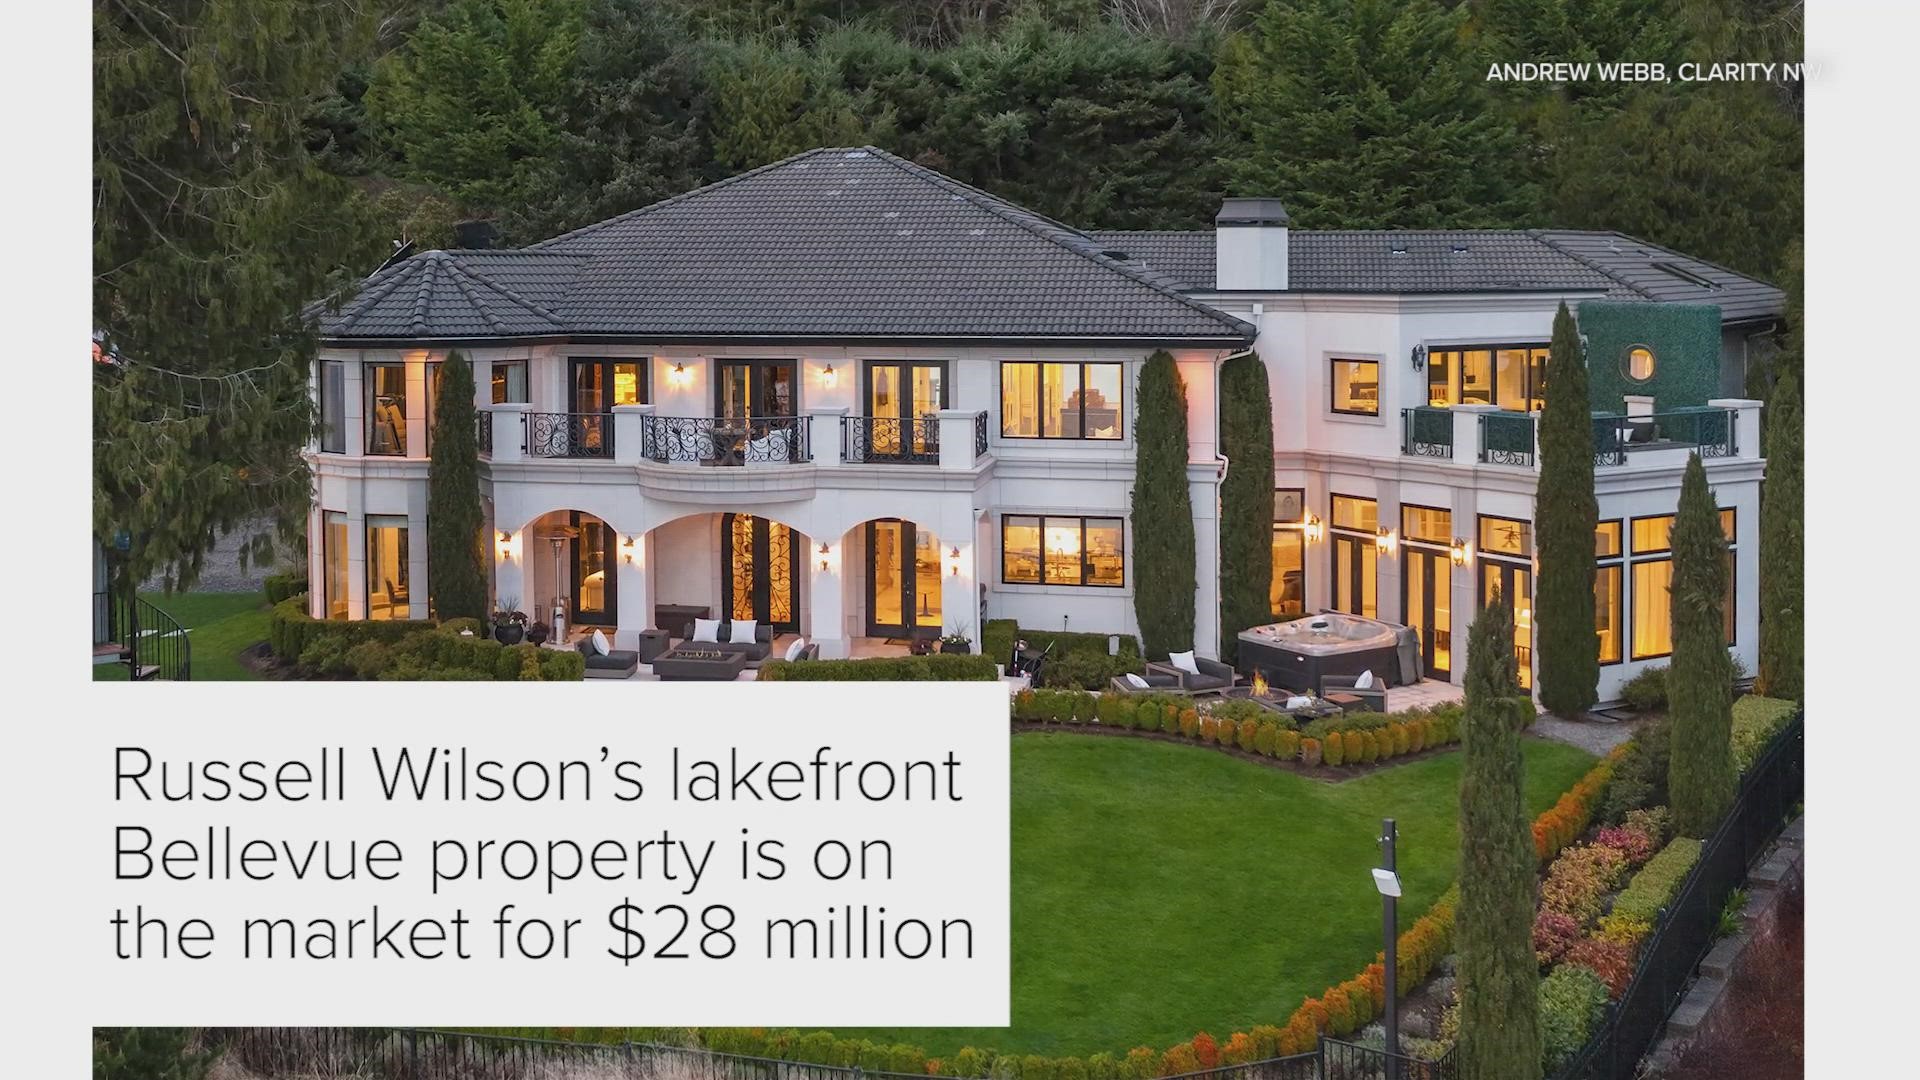 If you plan on keeping up with the Wilsons, it'll cost you. Their Bellevue estate just hit the market for $28 million with an adjacent lot going for $8 million